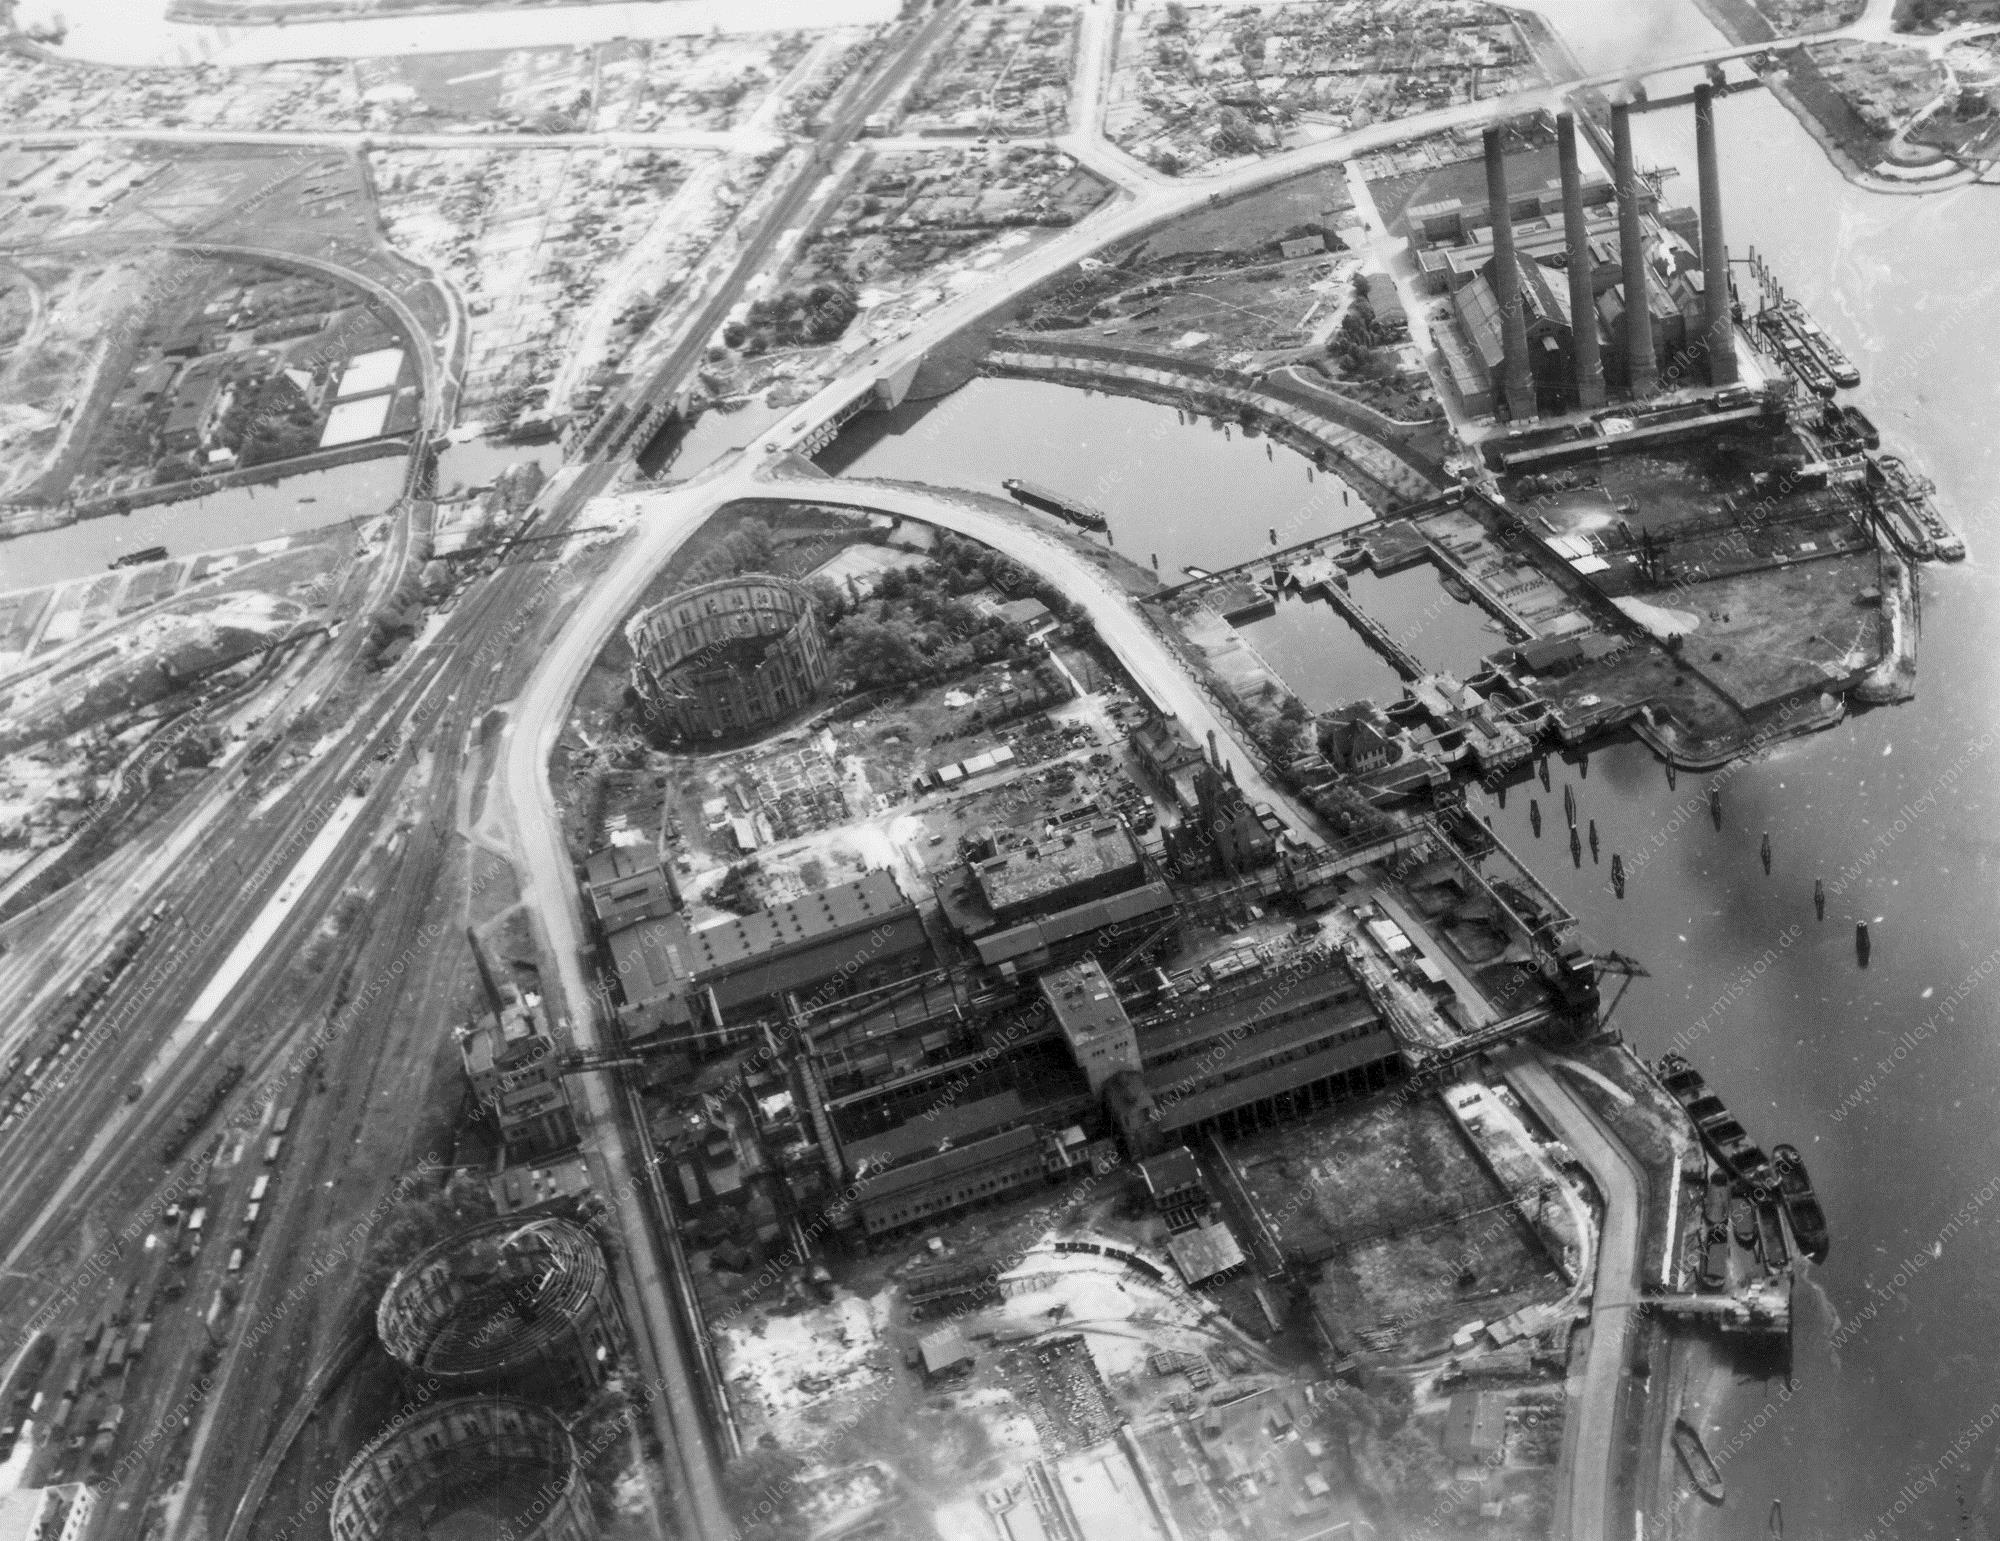 Hamburg from above: Aerial view after Allied air raids in World War II